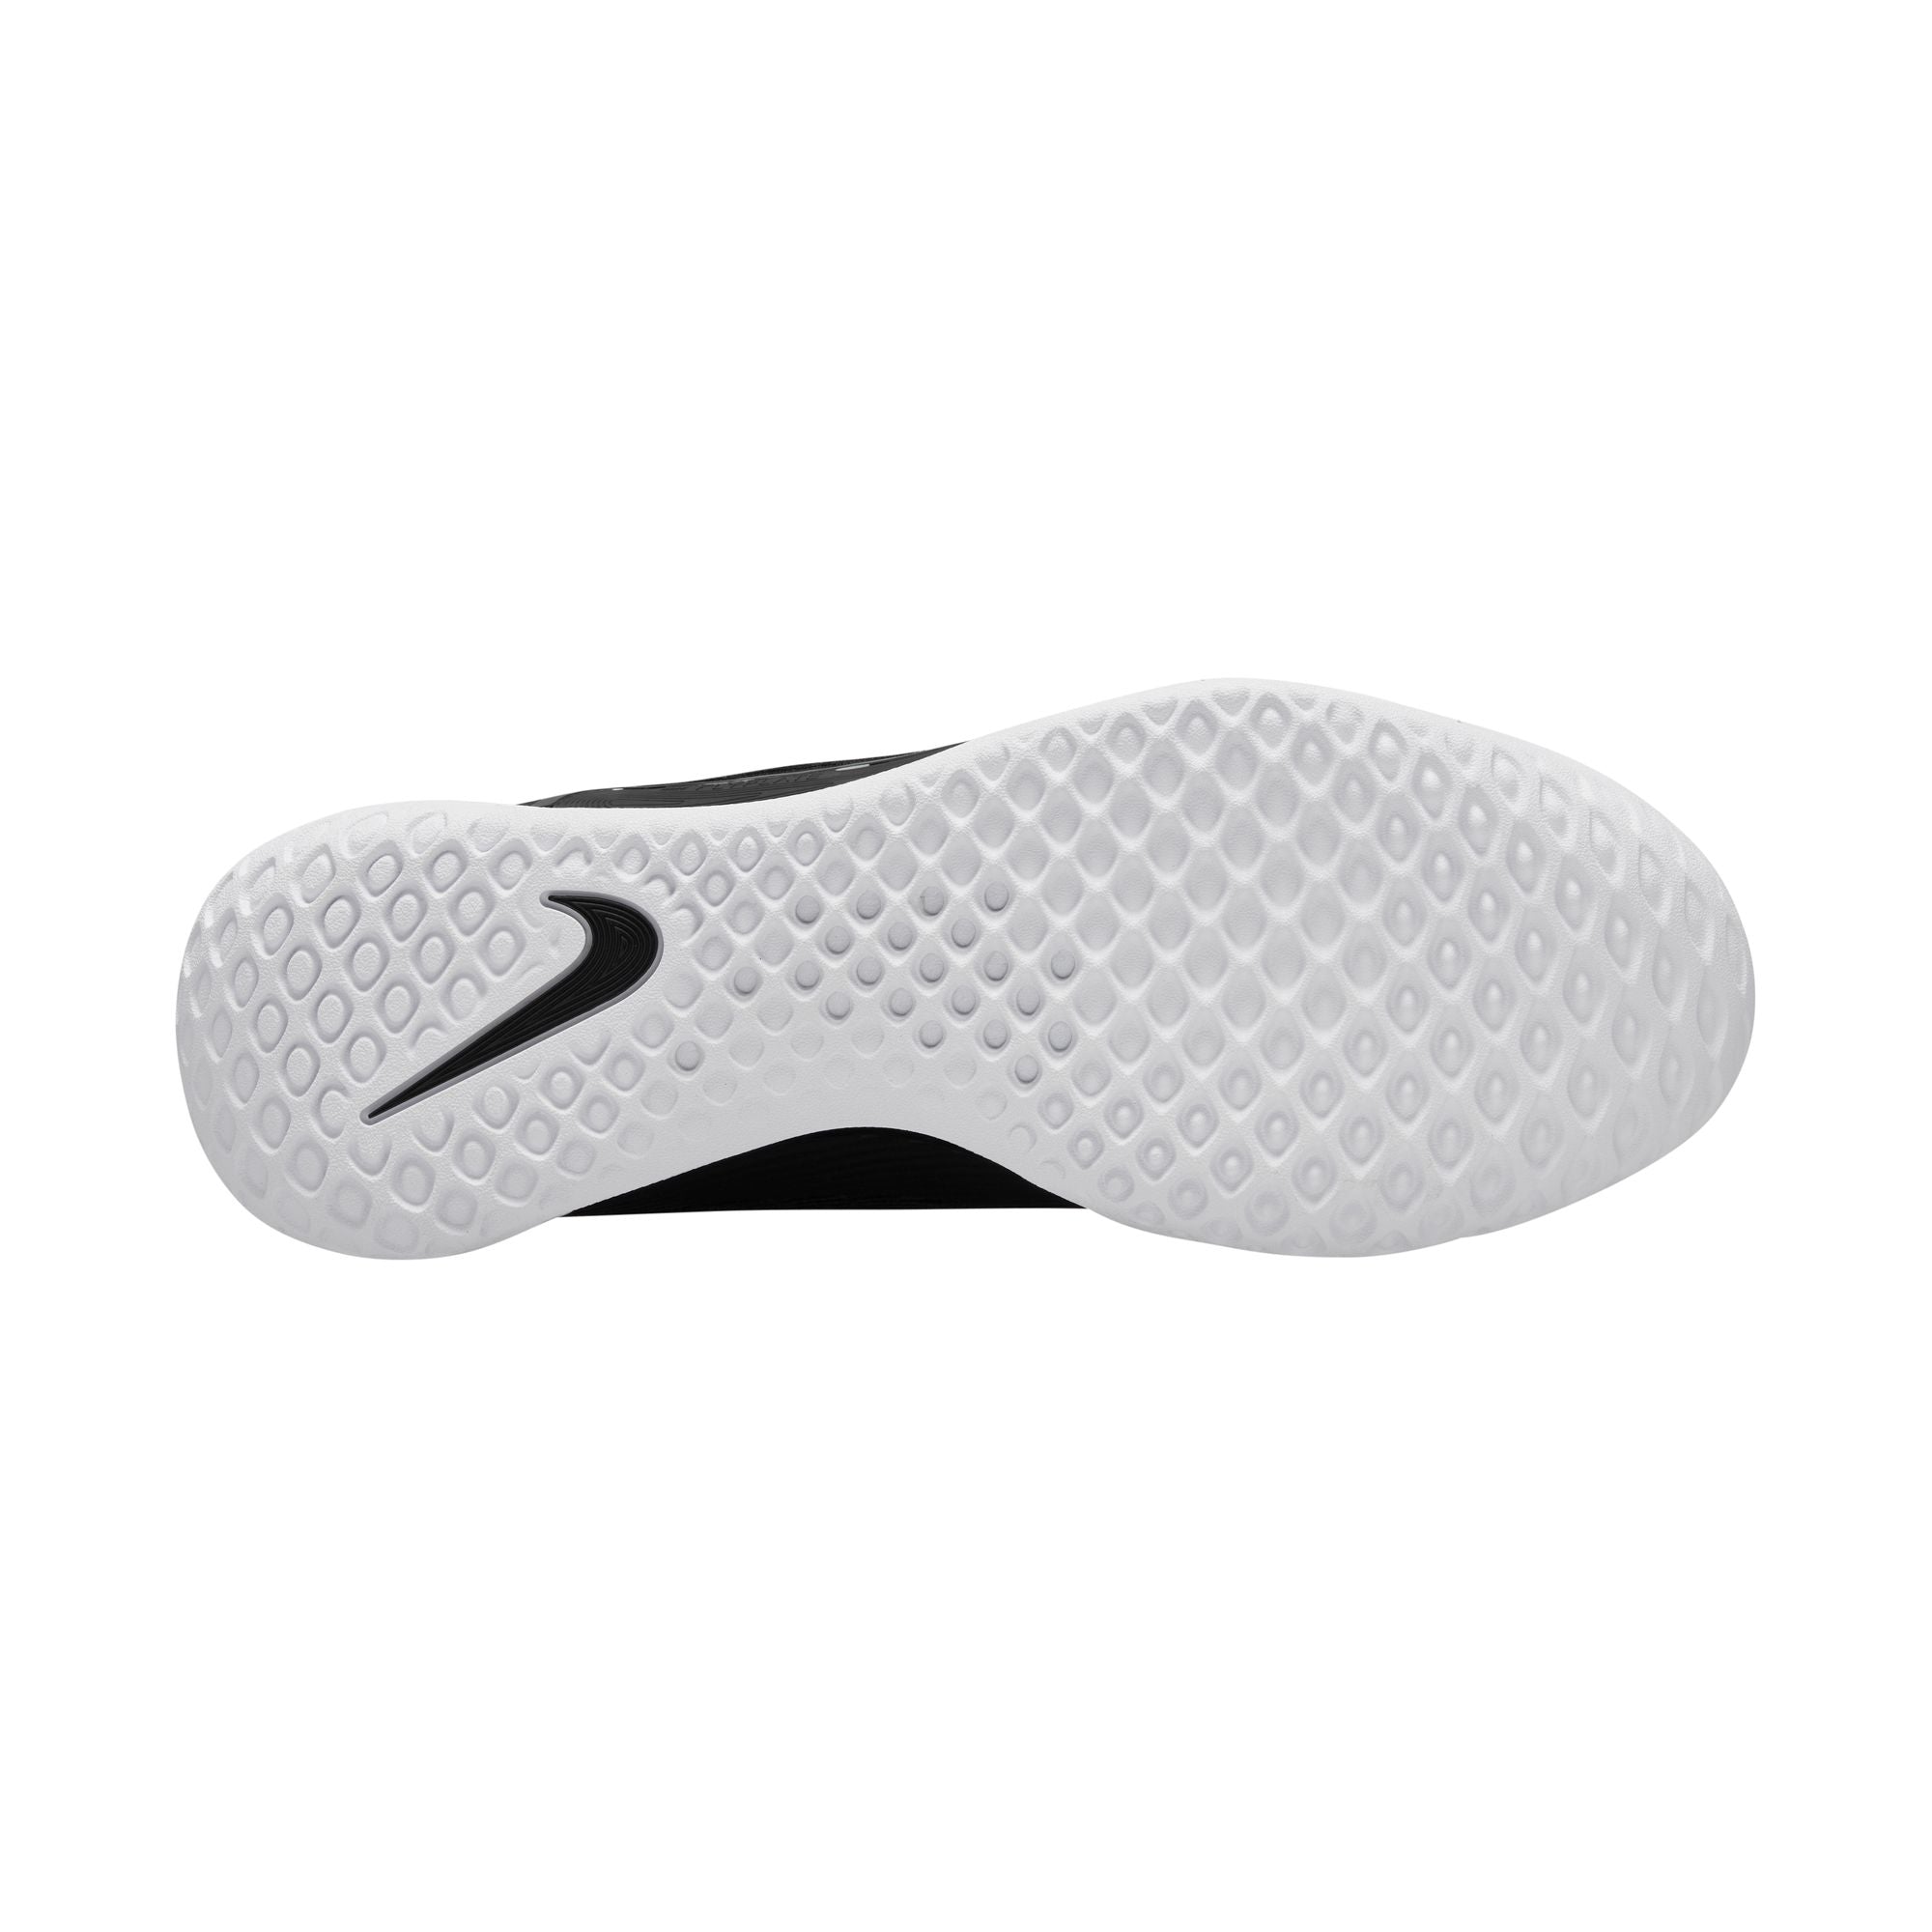 Nike Men's ZOOM COURT NXT HC Shoes in BLACK/WHITE